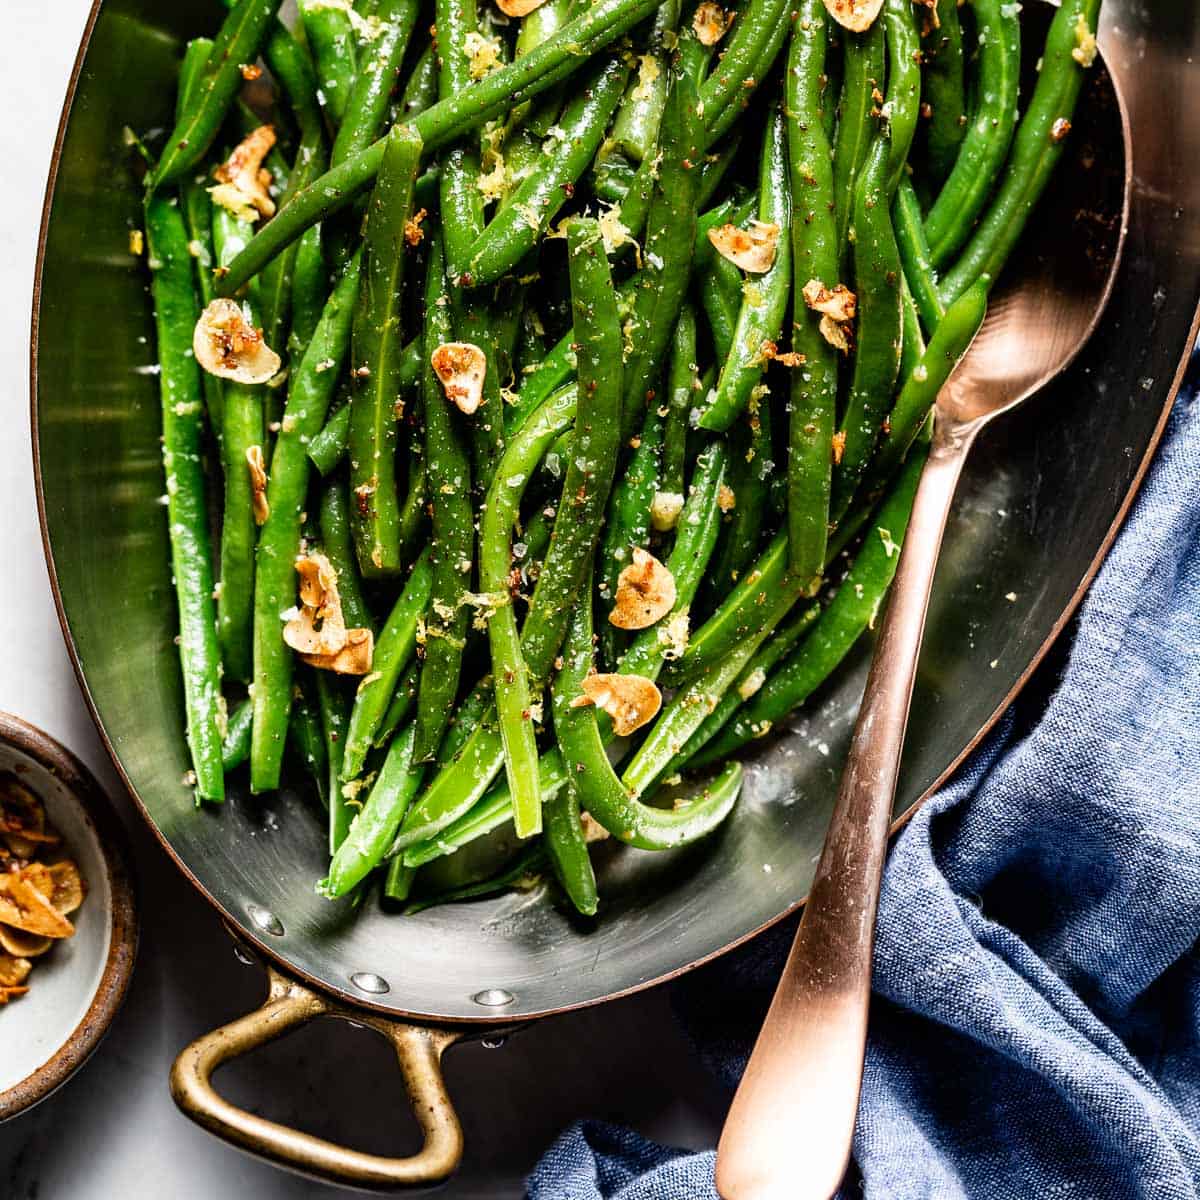 Haricot Vert - French Green Beans With Garlic and Sliced Almonds Recipe 